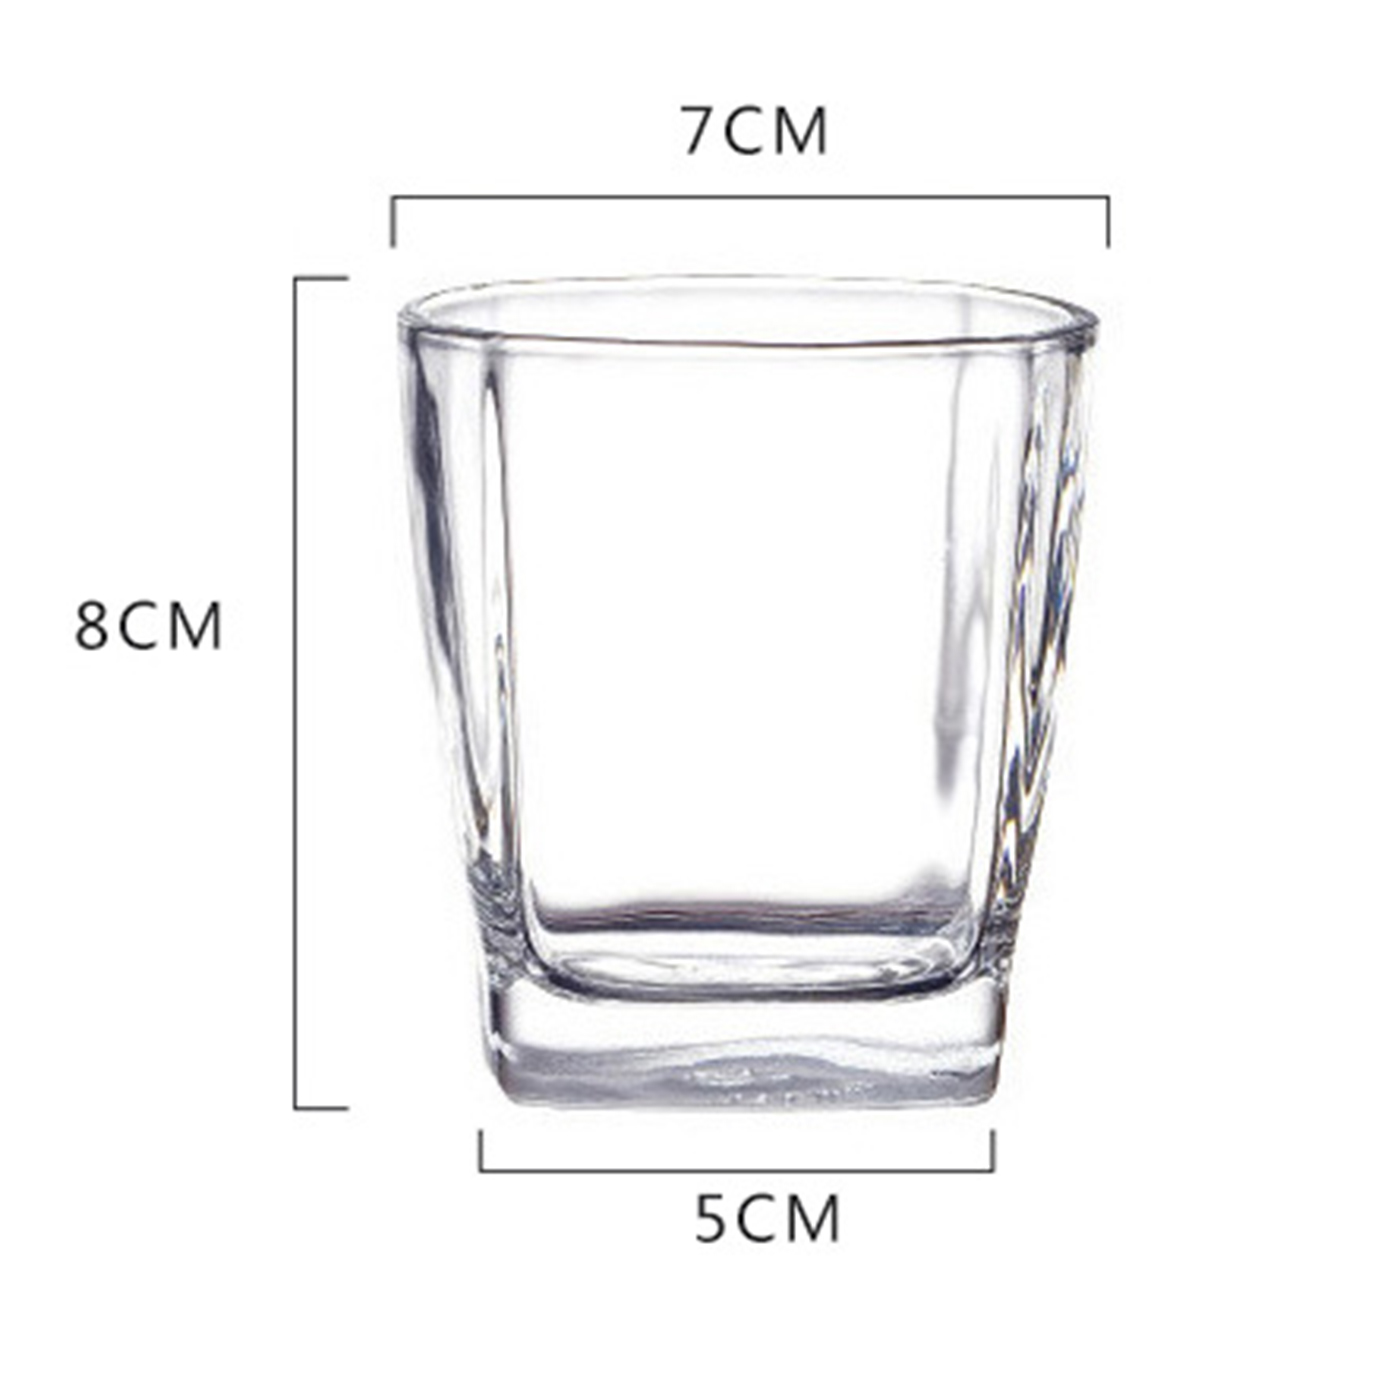 6 oz. Promotional Square Whiskey Glass3